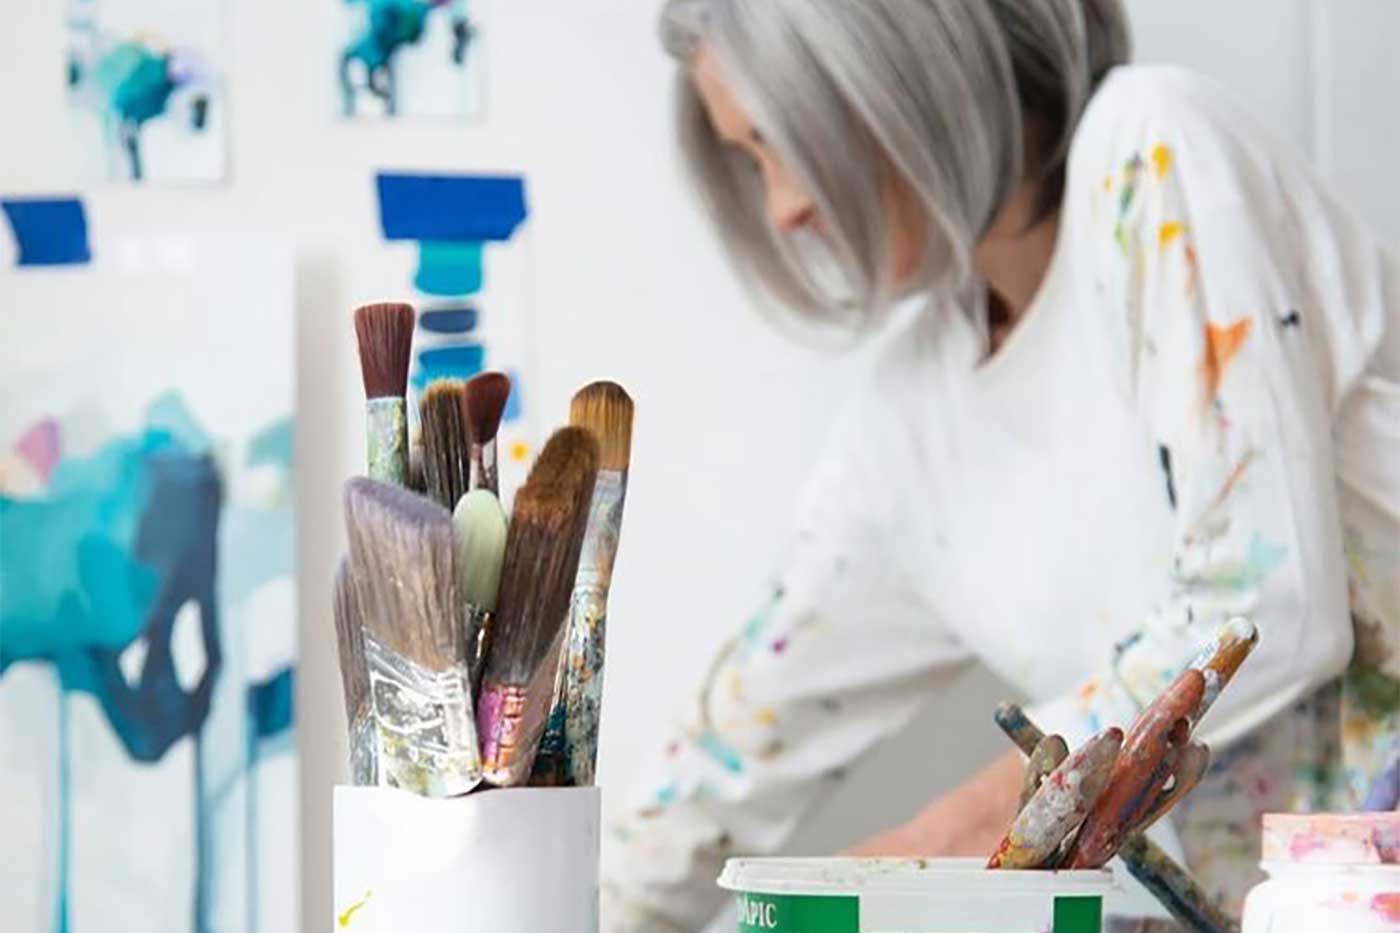 Canadian abstract artist Susannah Bleasby at work in her art studio